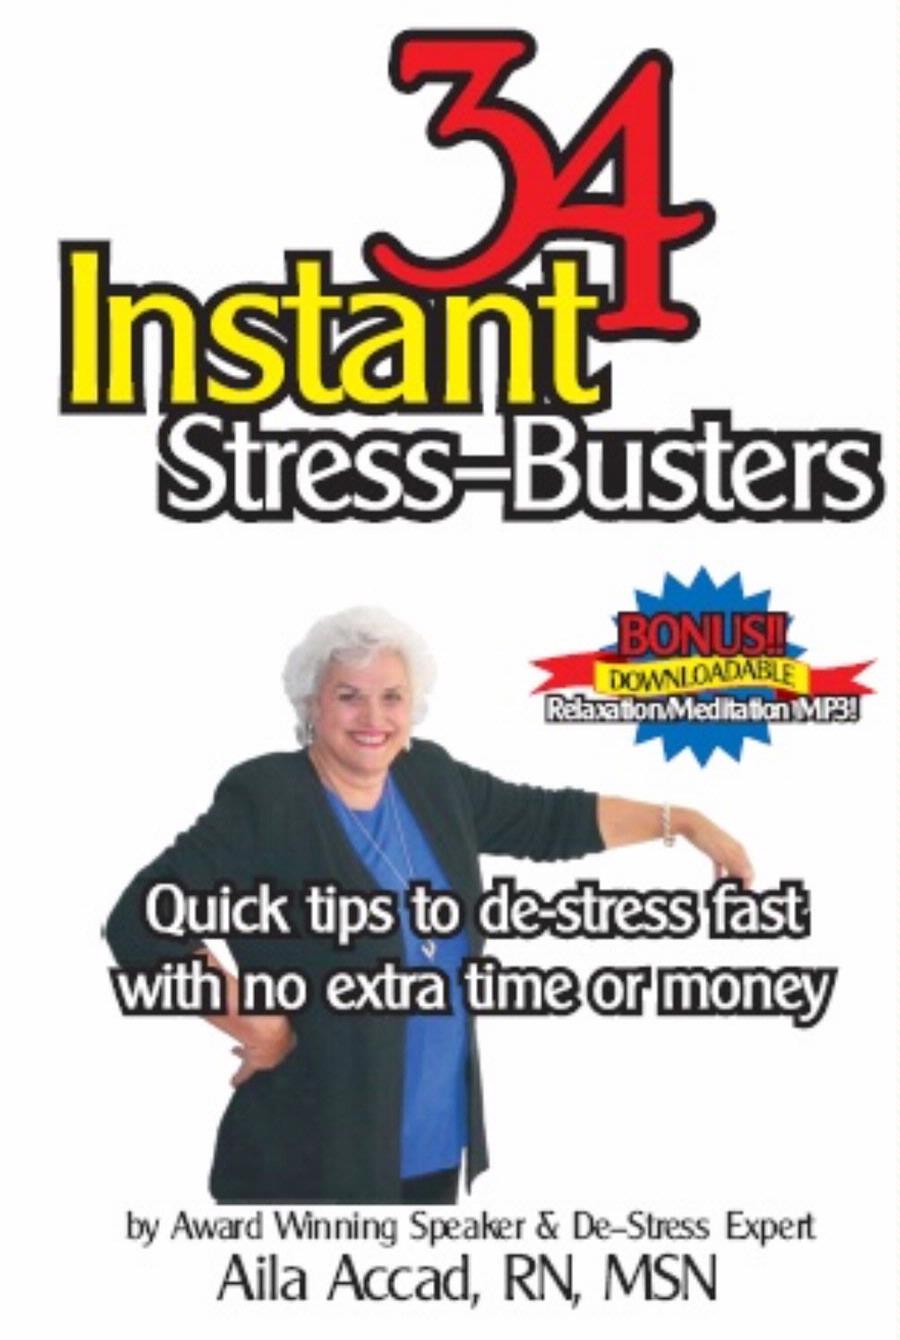 Book: 34 Instant Stress-Busters by Aila Accad, RN